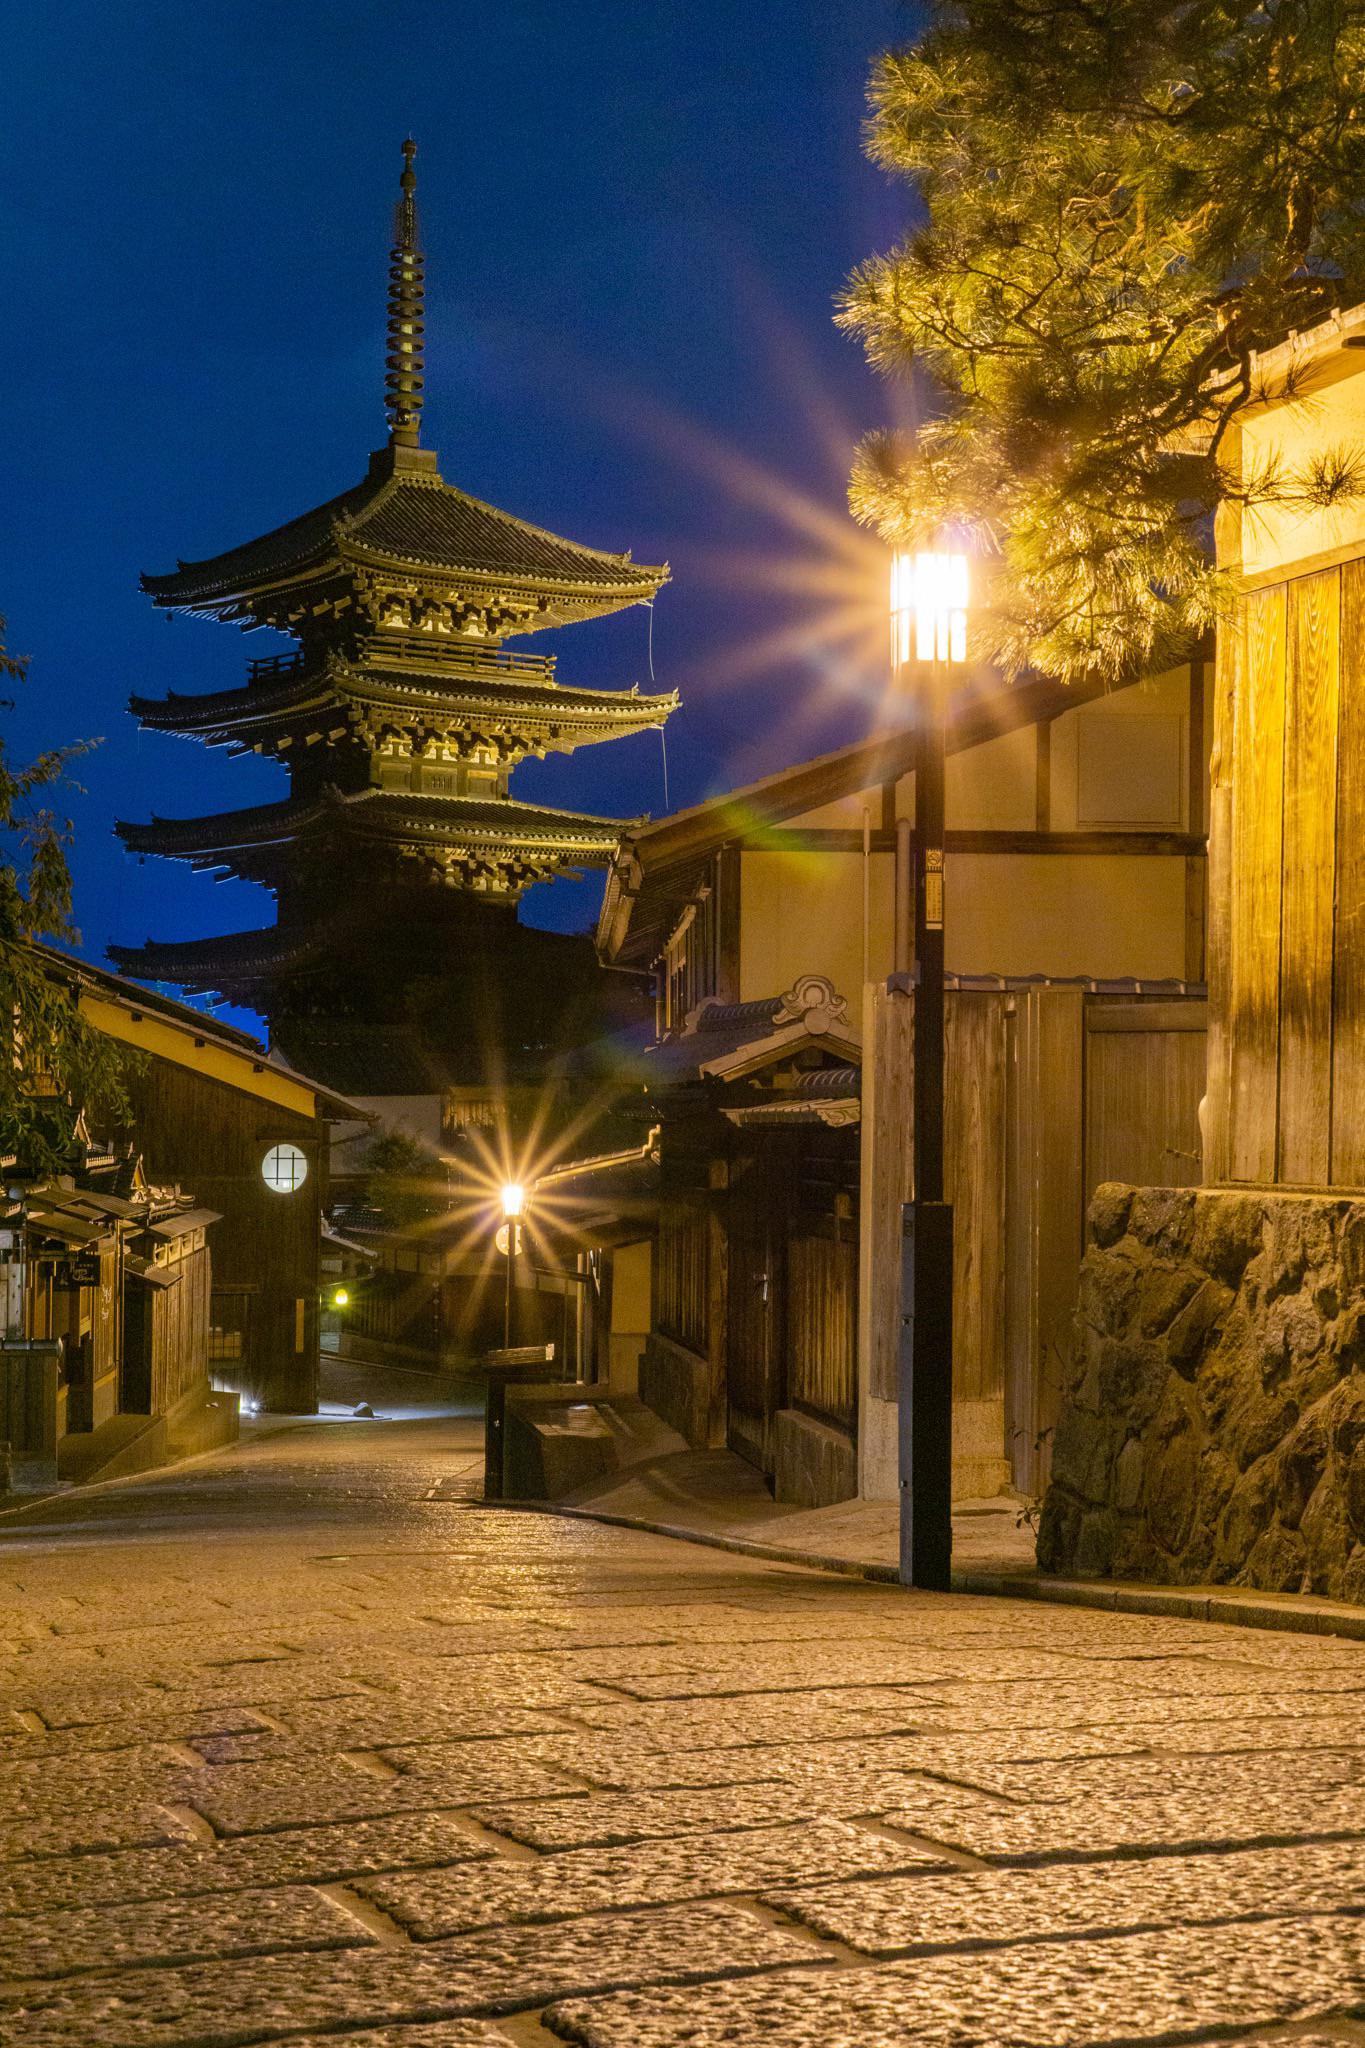 To-ji in Kyoto at night. Not exactly a unique image, but I like it ...